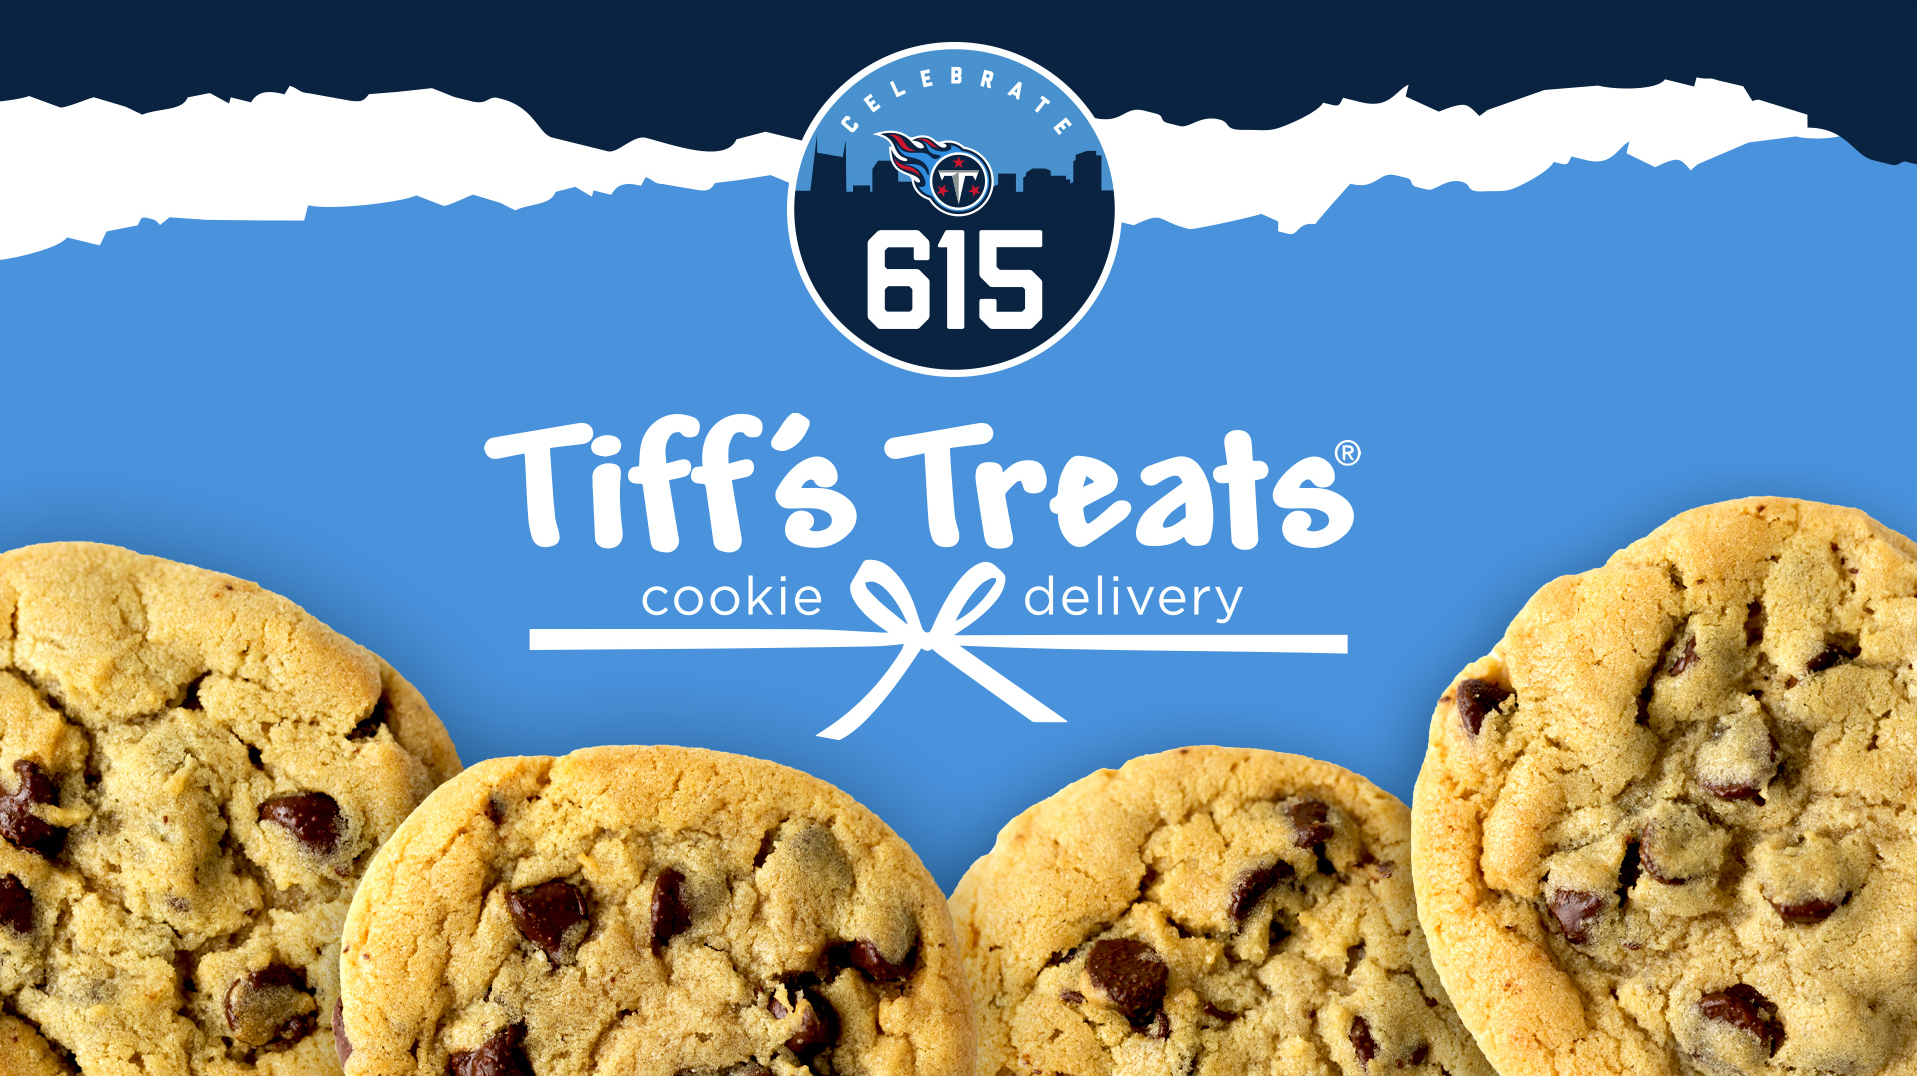 Tiff's Treats Cookie Delivery Titans 615